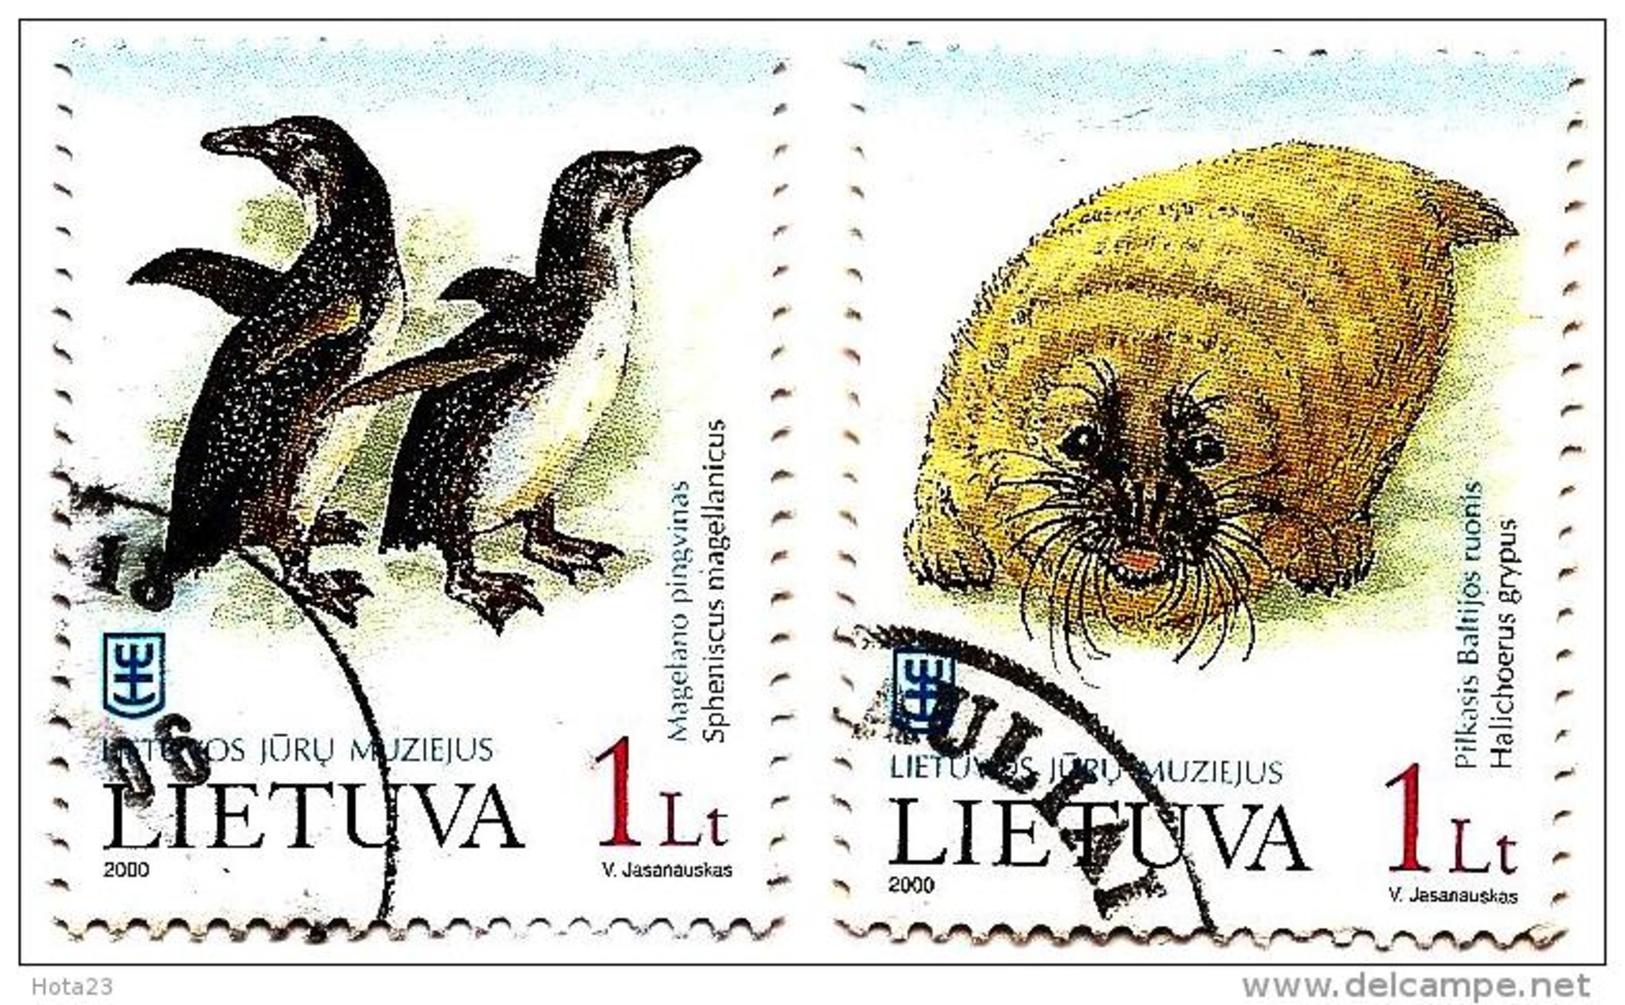 LITHUANIA 2000 Maritime Museum FULL SET Used STAMP (0) (LOT - LT - 017 +018) - Lituanie